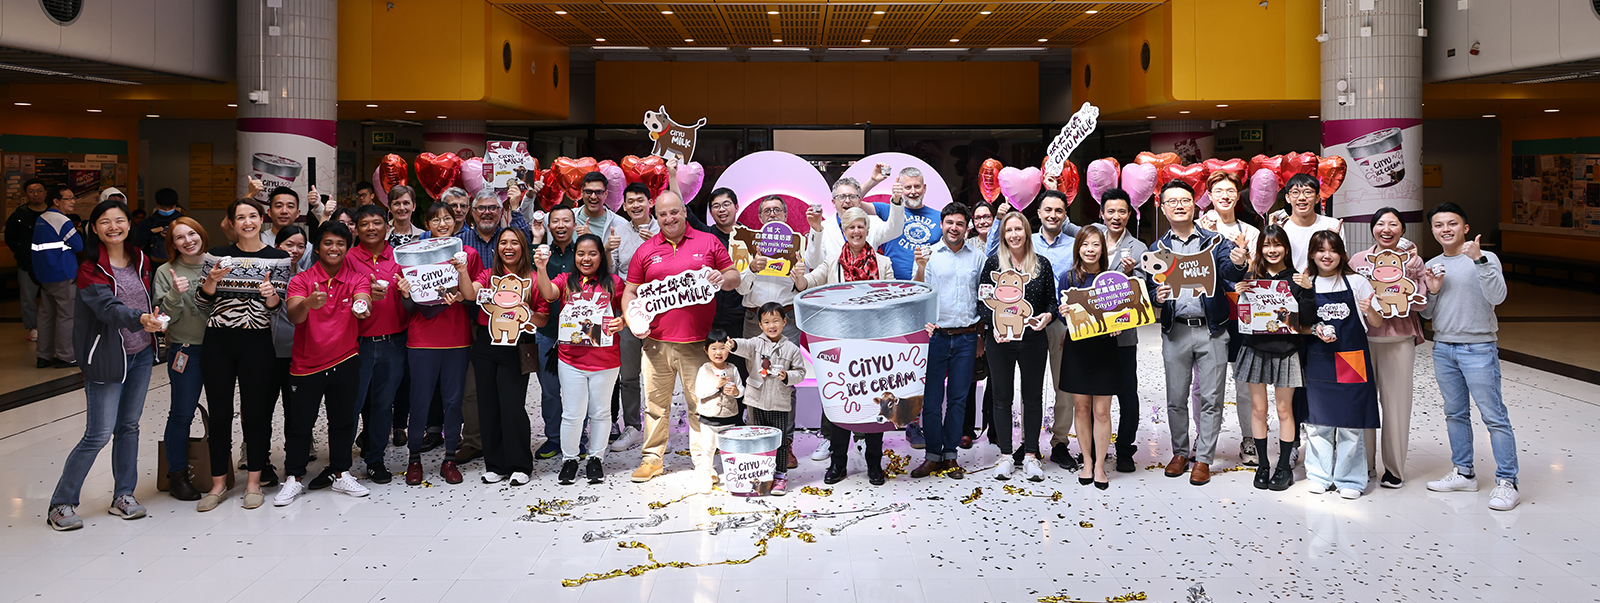 CityUHK Ice Cream is now available. Staff and students take part in the launch ceremony.